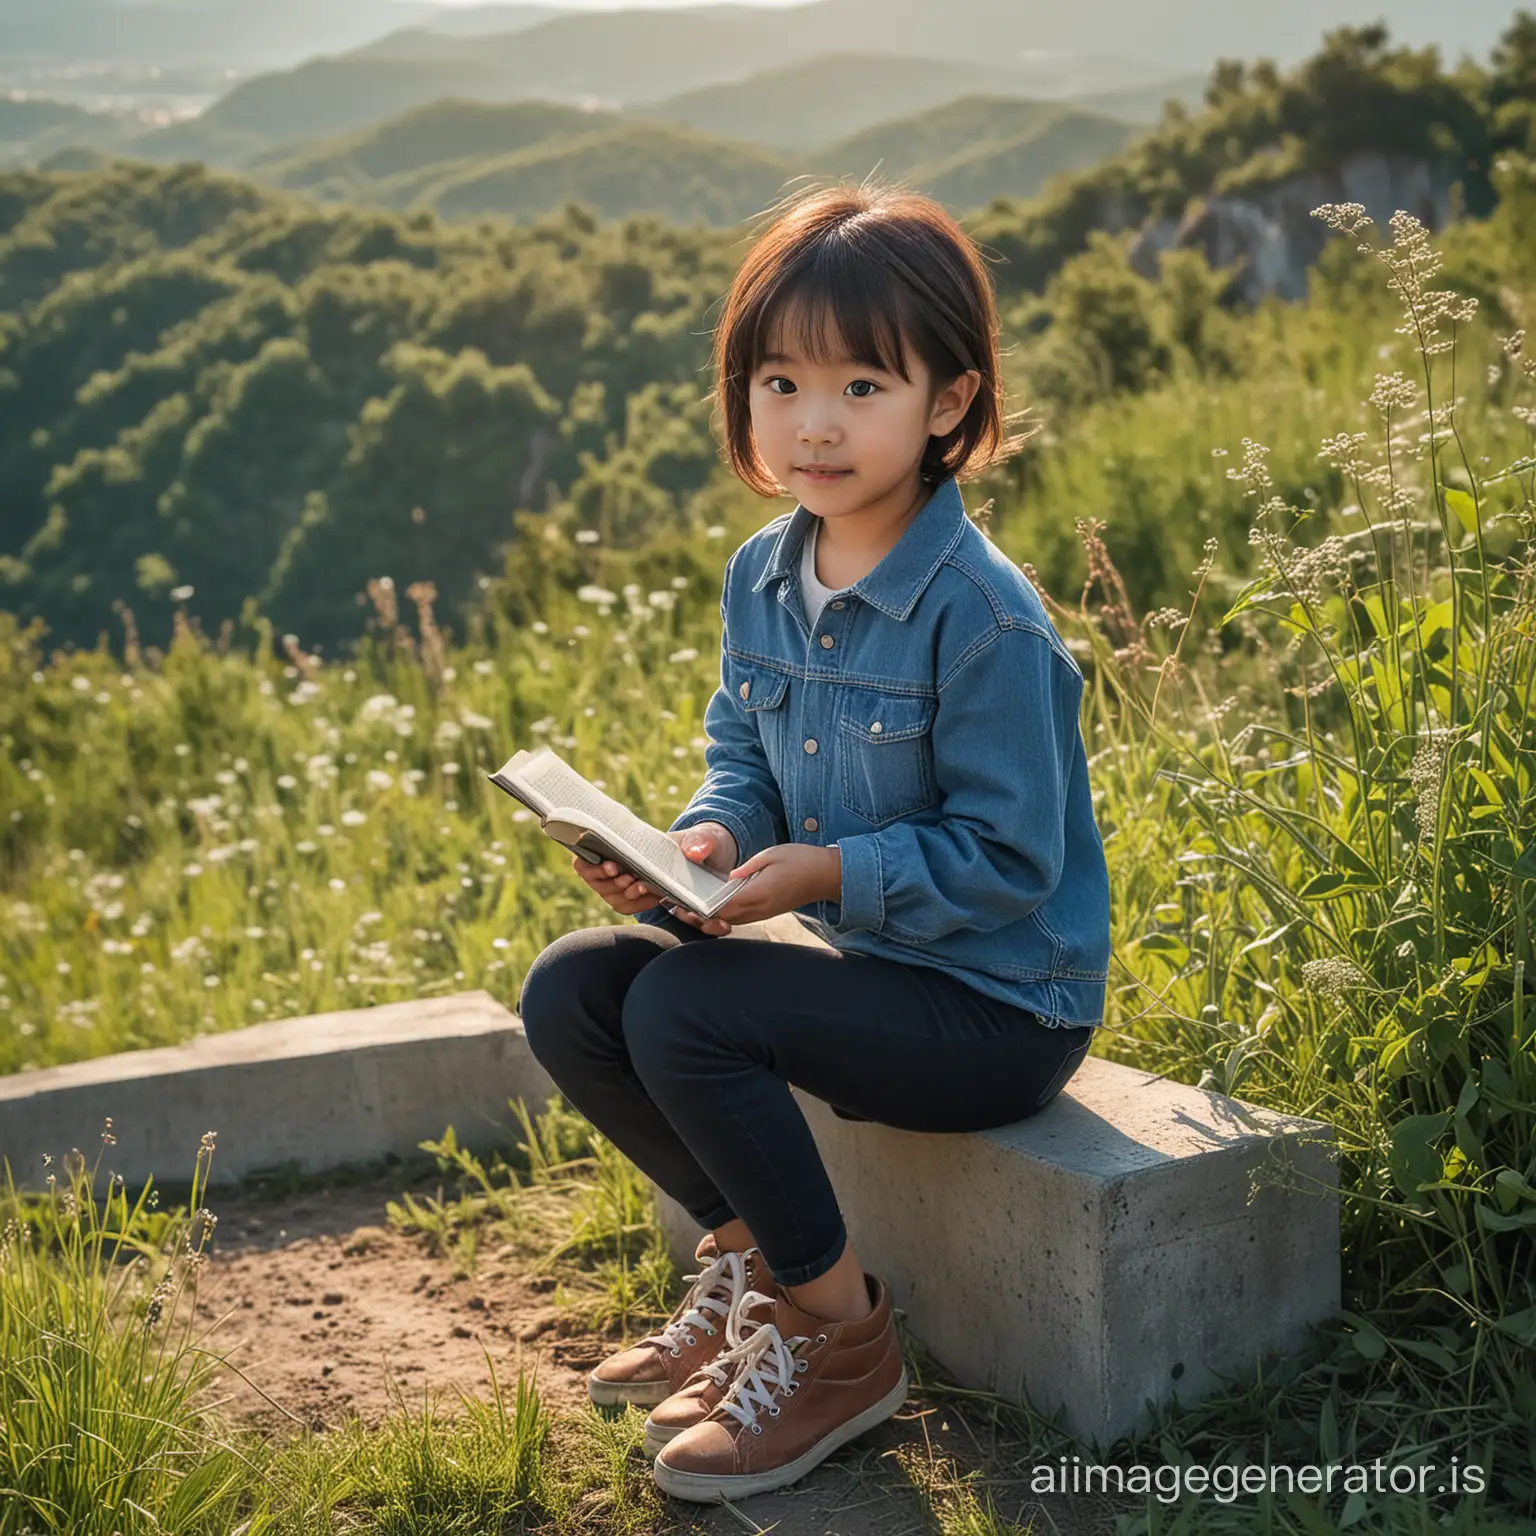 Young-Asian-Girl-Reading-on-a-Hilltop-Amidst-Natural-Surroundings